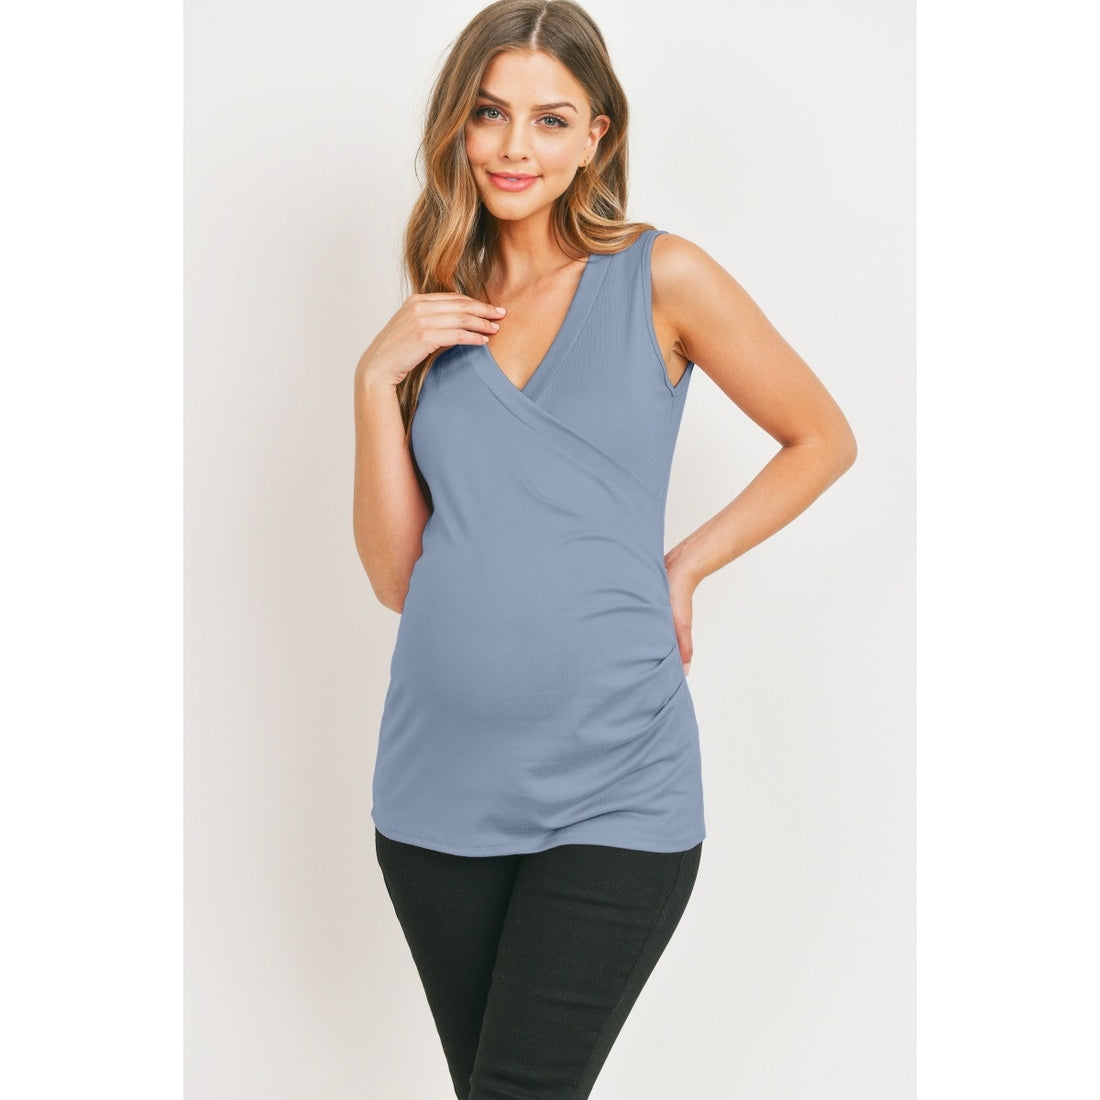 Nursing Tops > Easy Access Breastfeeding Tops - Embrace the